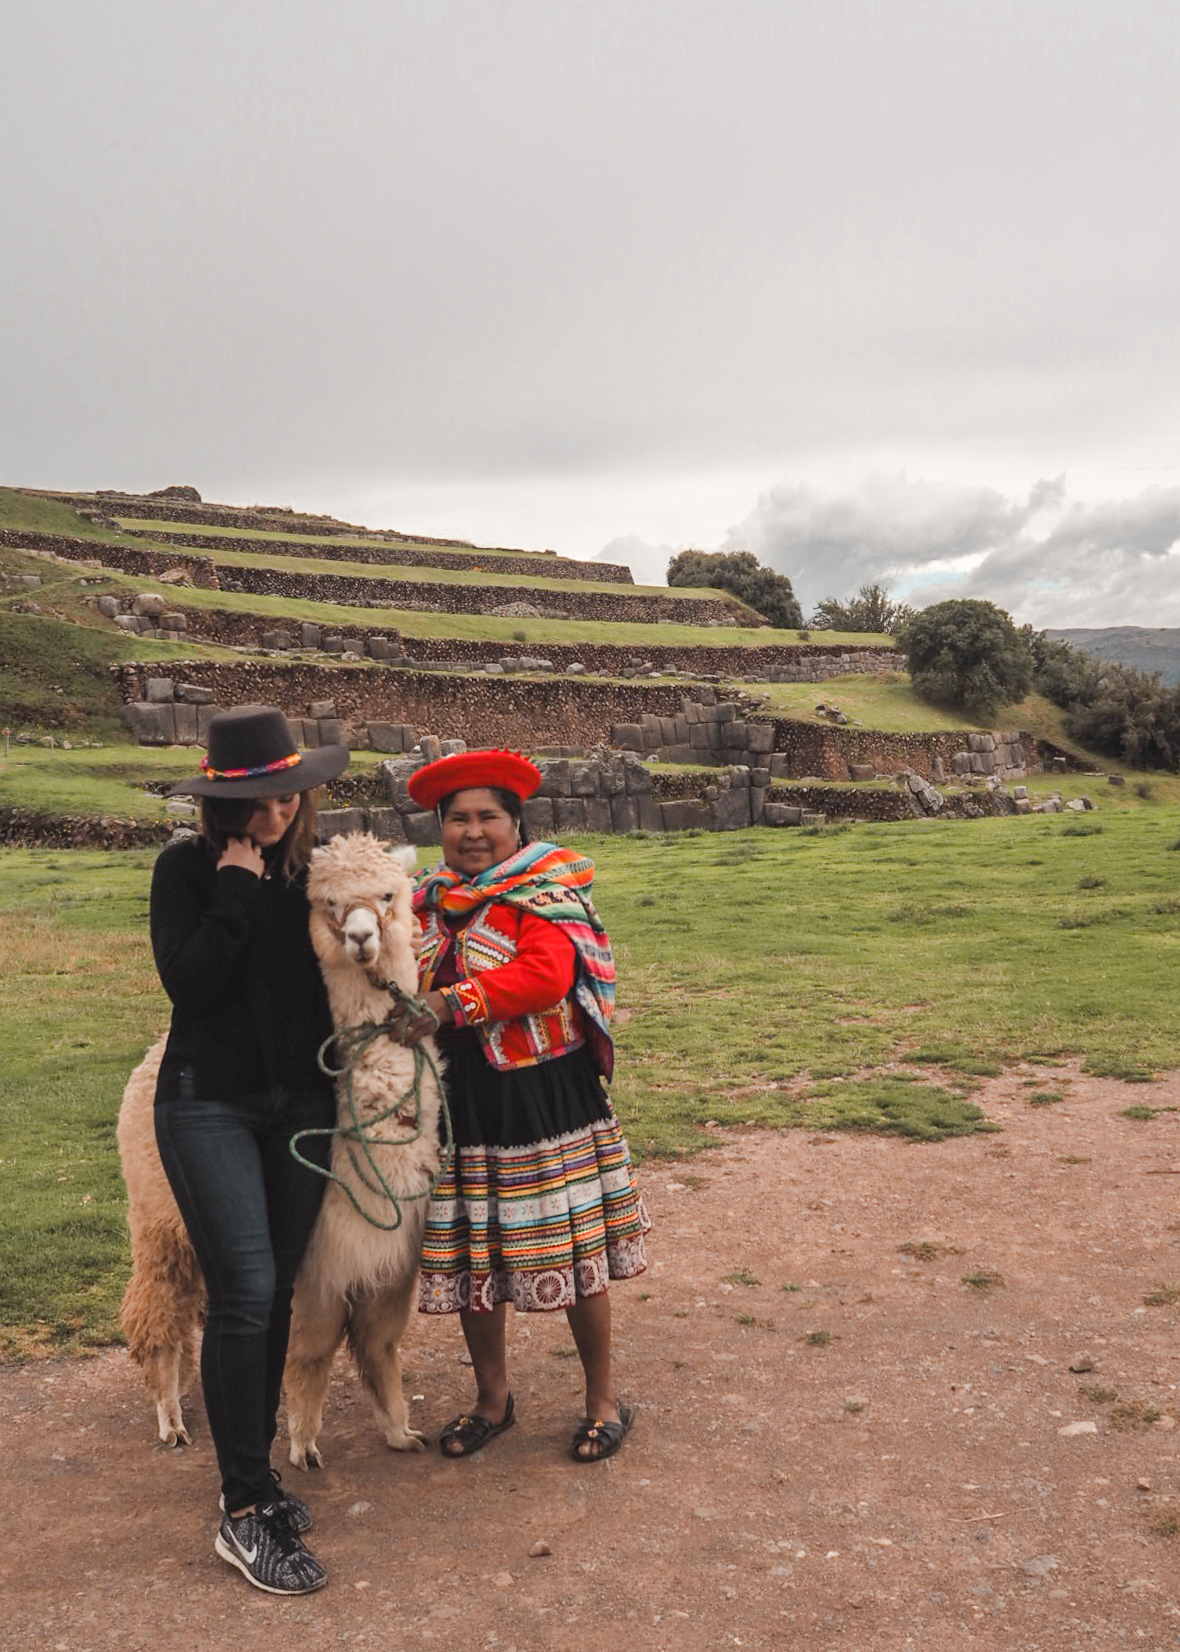 The Best Way To Explore Peru And Meet Like-Minded Travelers | lifestyletraveler.co | IG: @lifestyletraveler.co